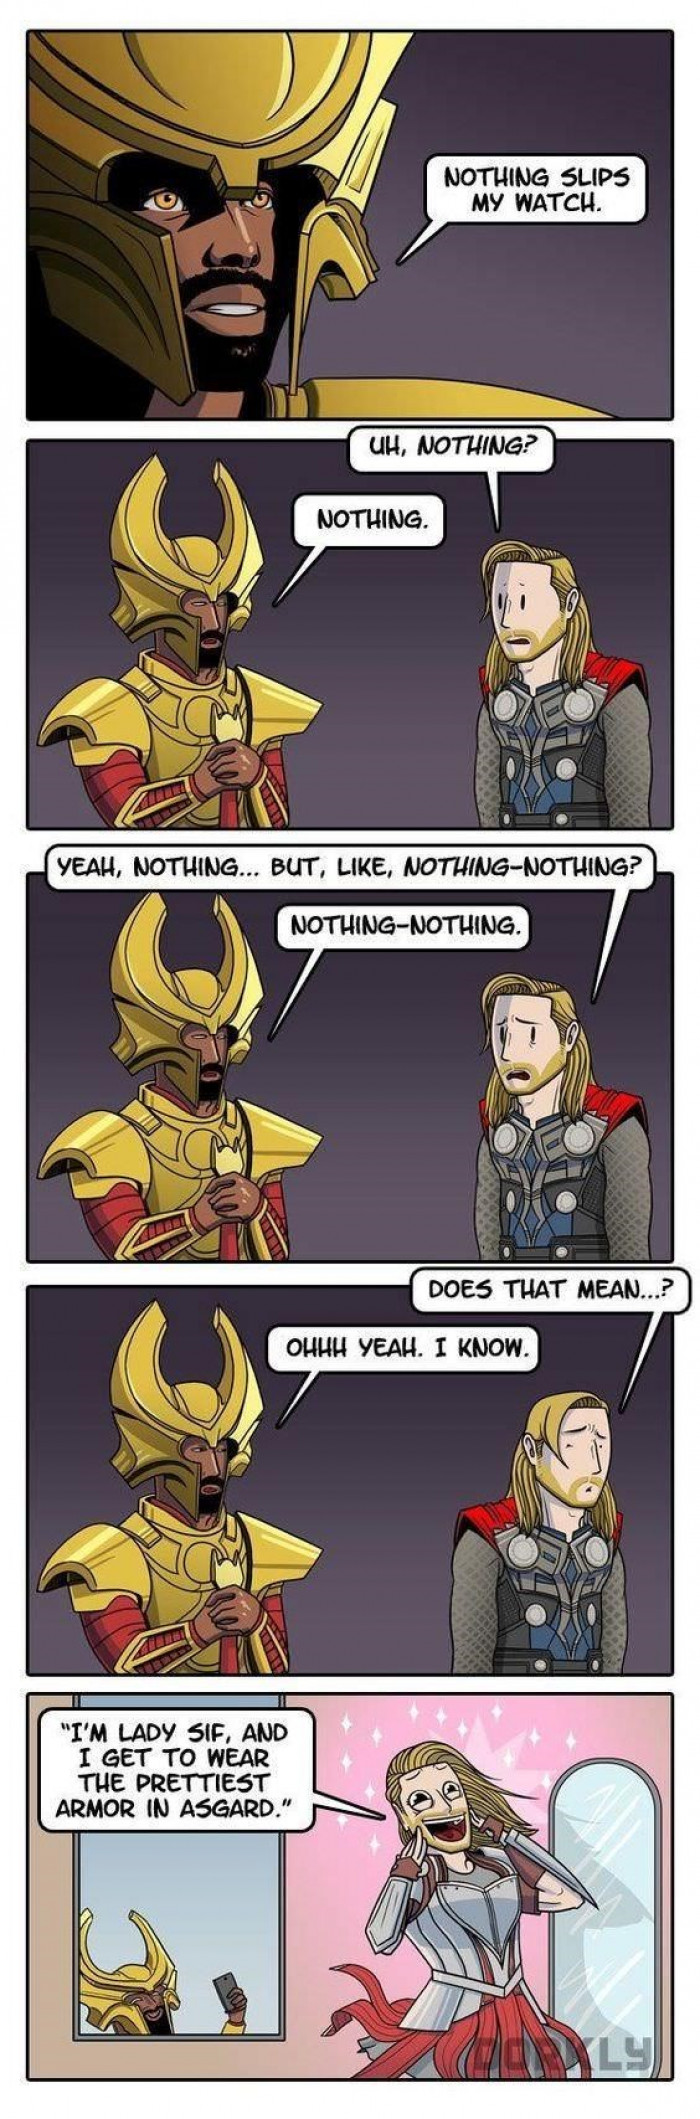 26. Didn't know about this side of Thor.